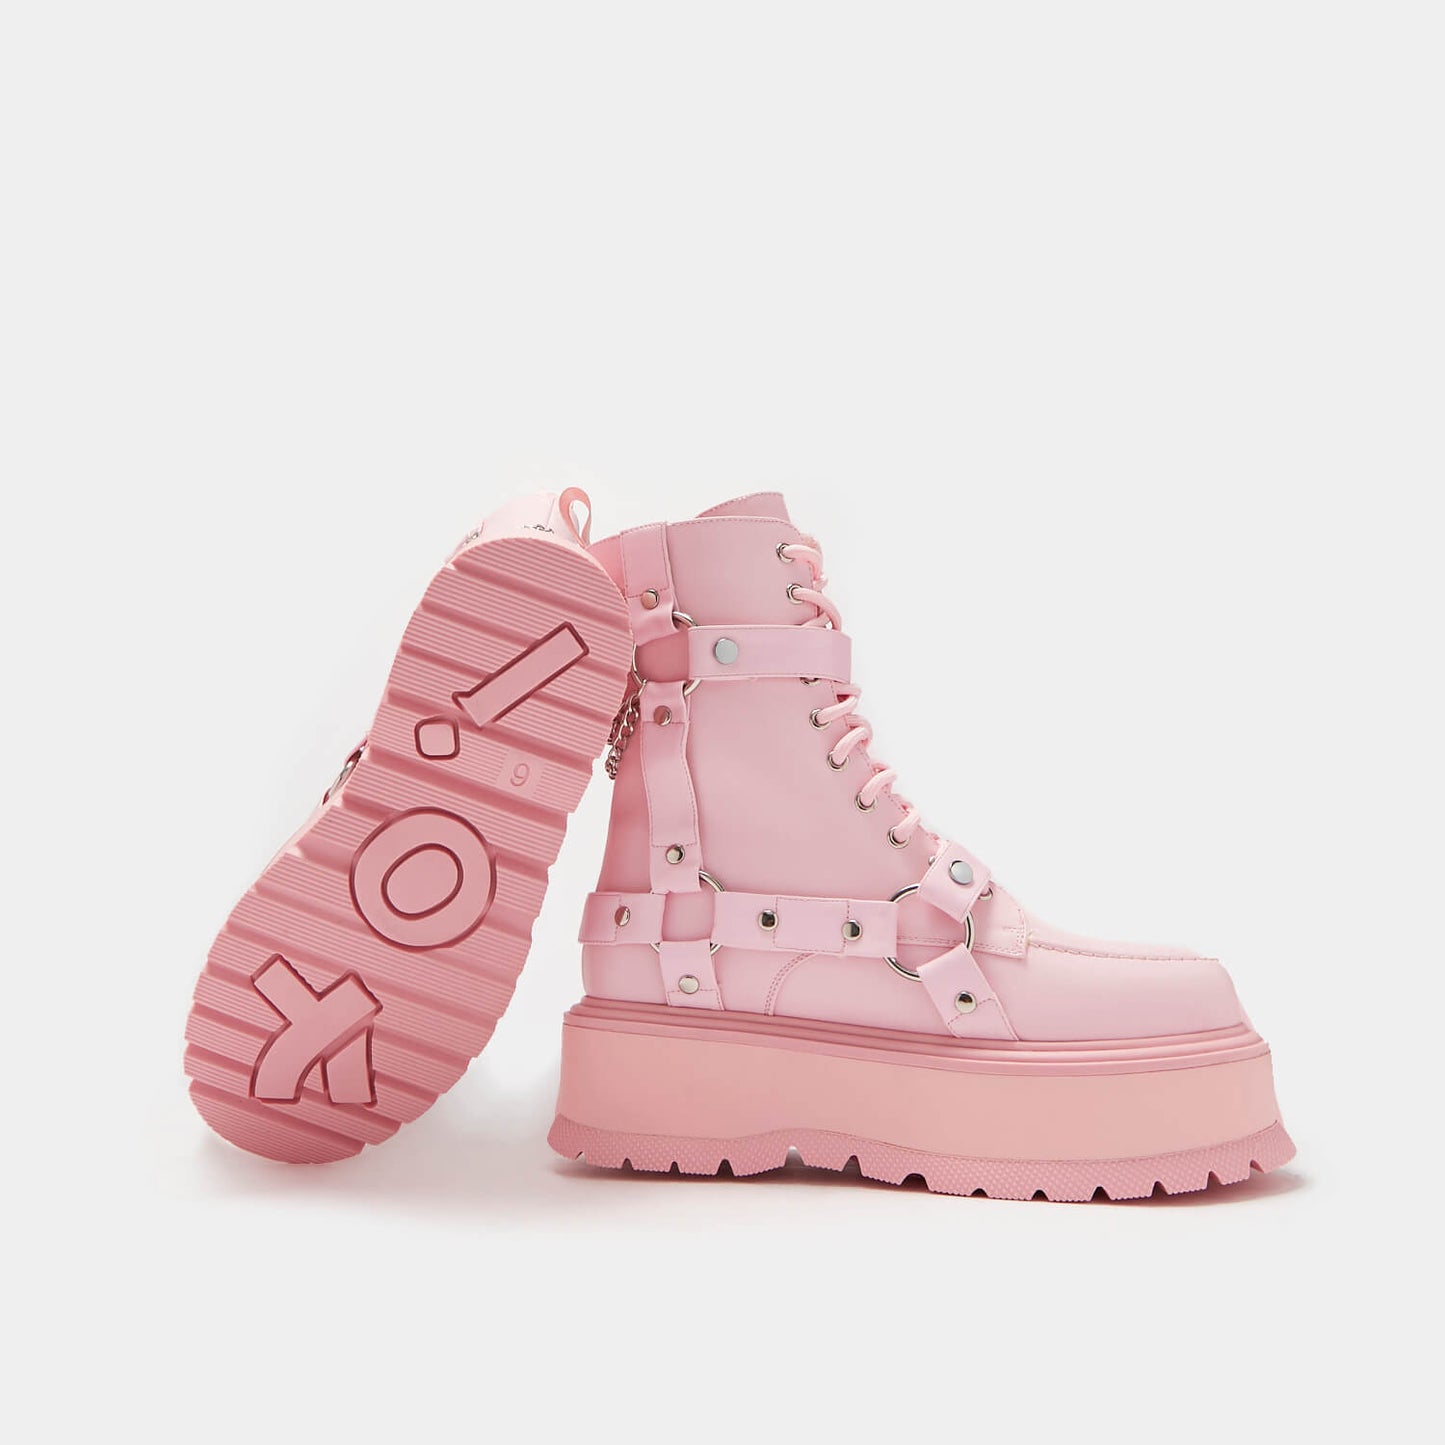 Yami Pastel Pink Platform Boots - Ankle Boots - KOI Footwear - Pink - Sole and Side View